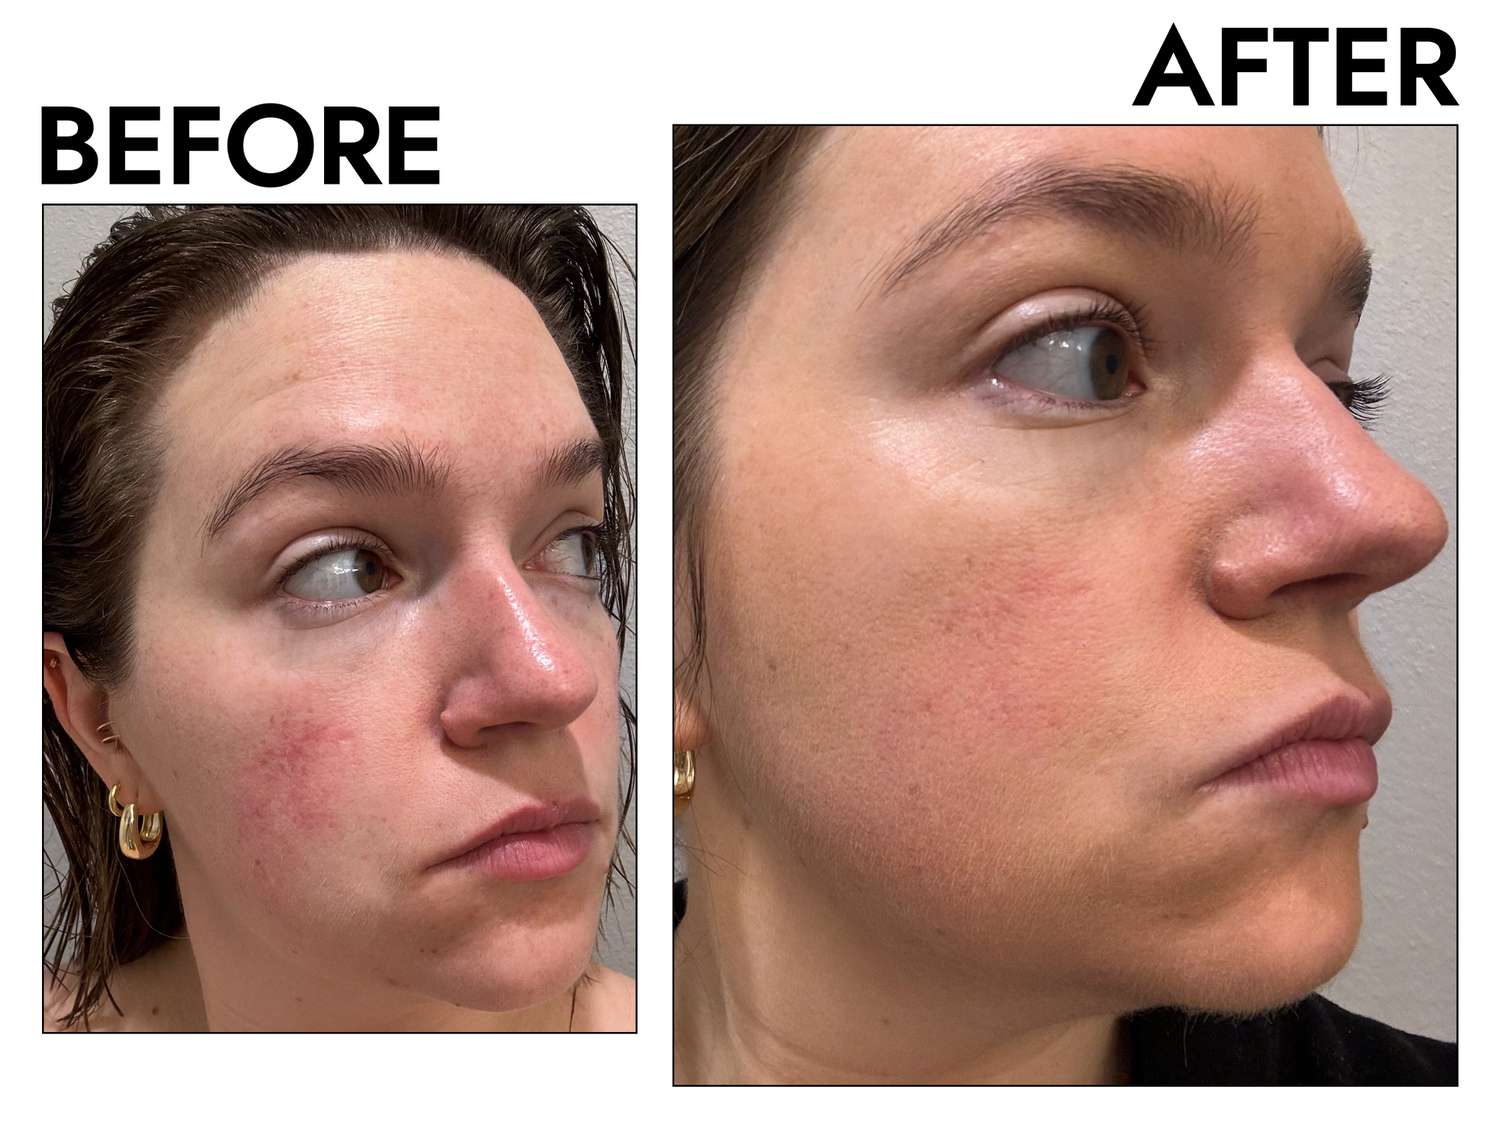 Before and After using Pacifica Kind Tint Tinted Serum